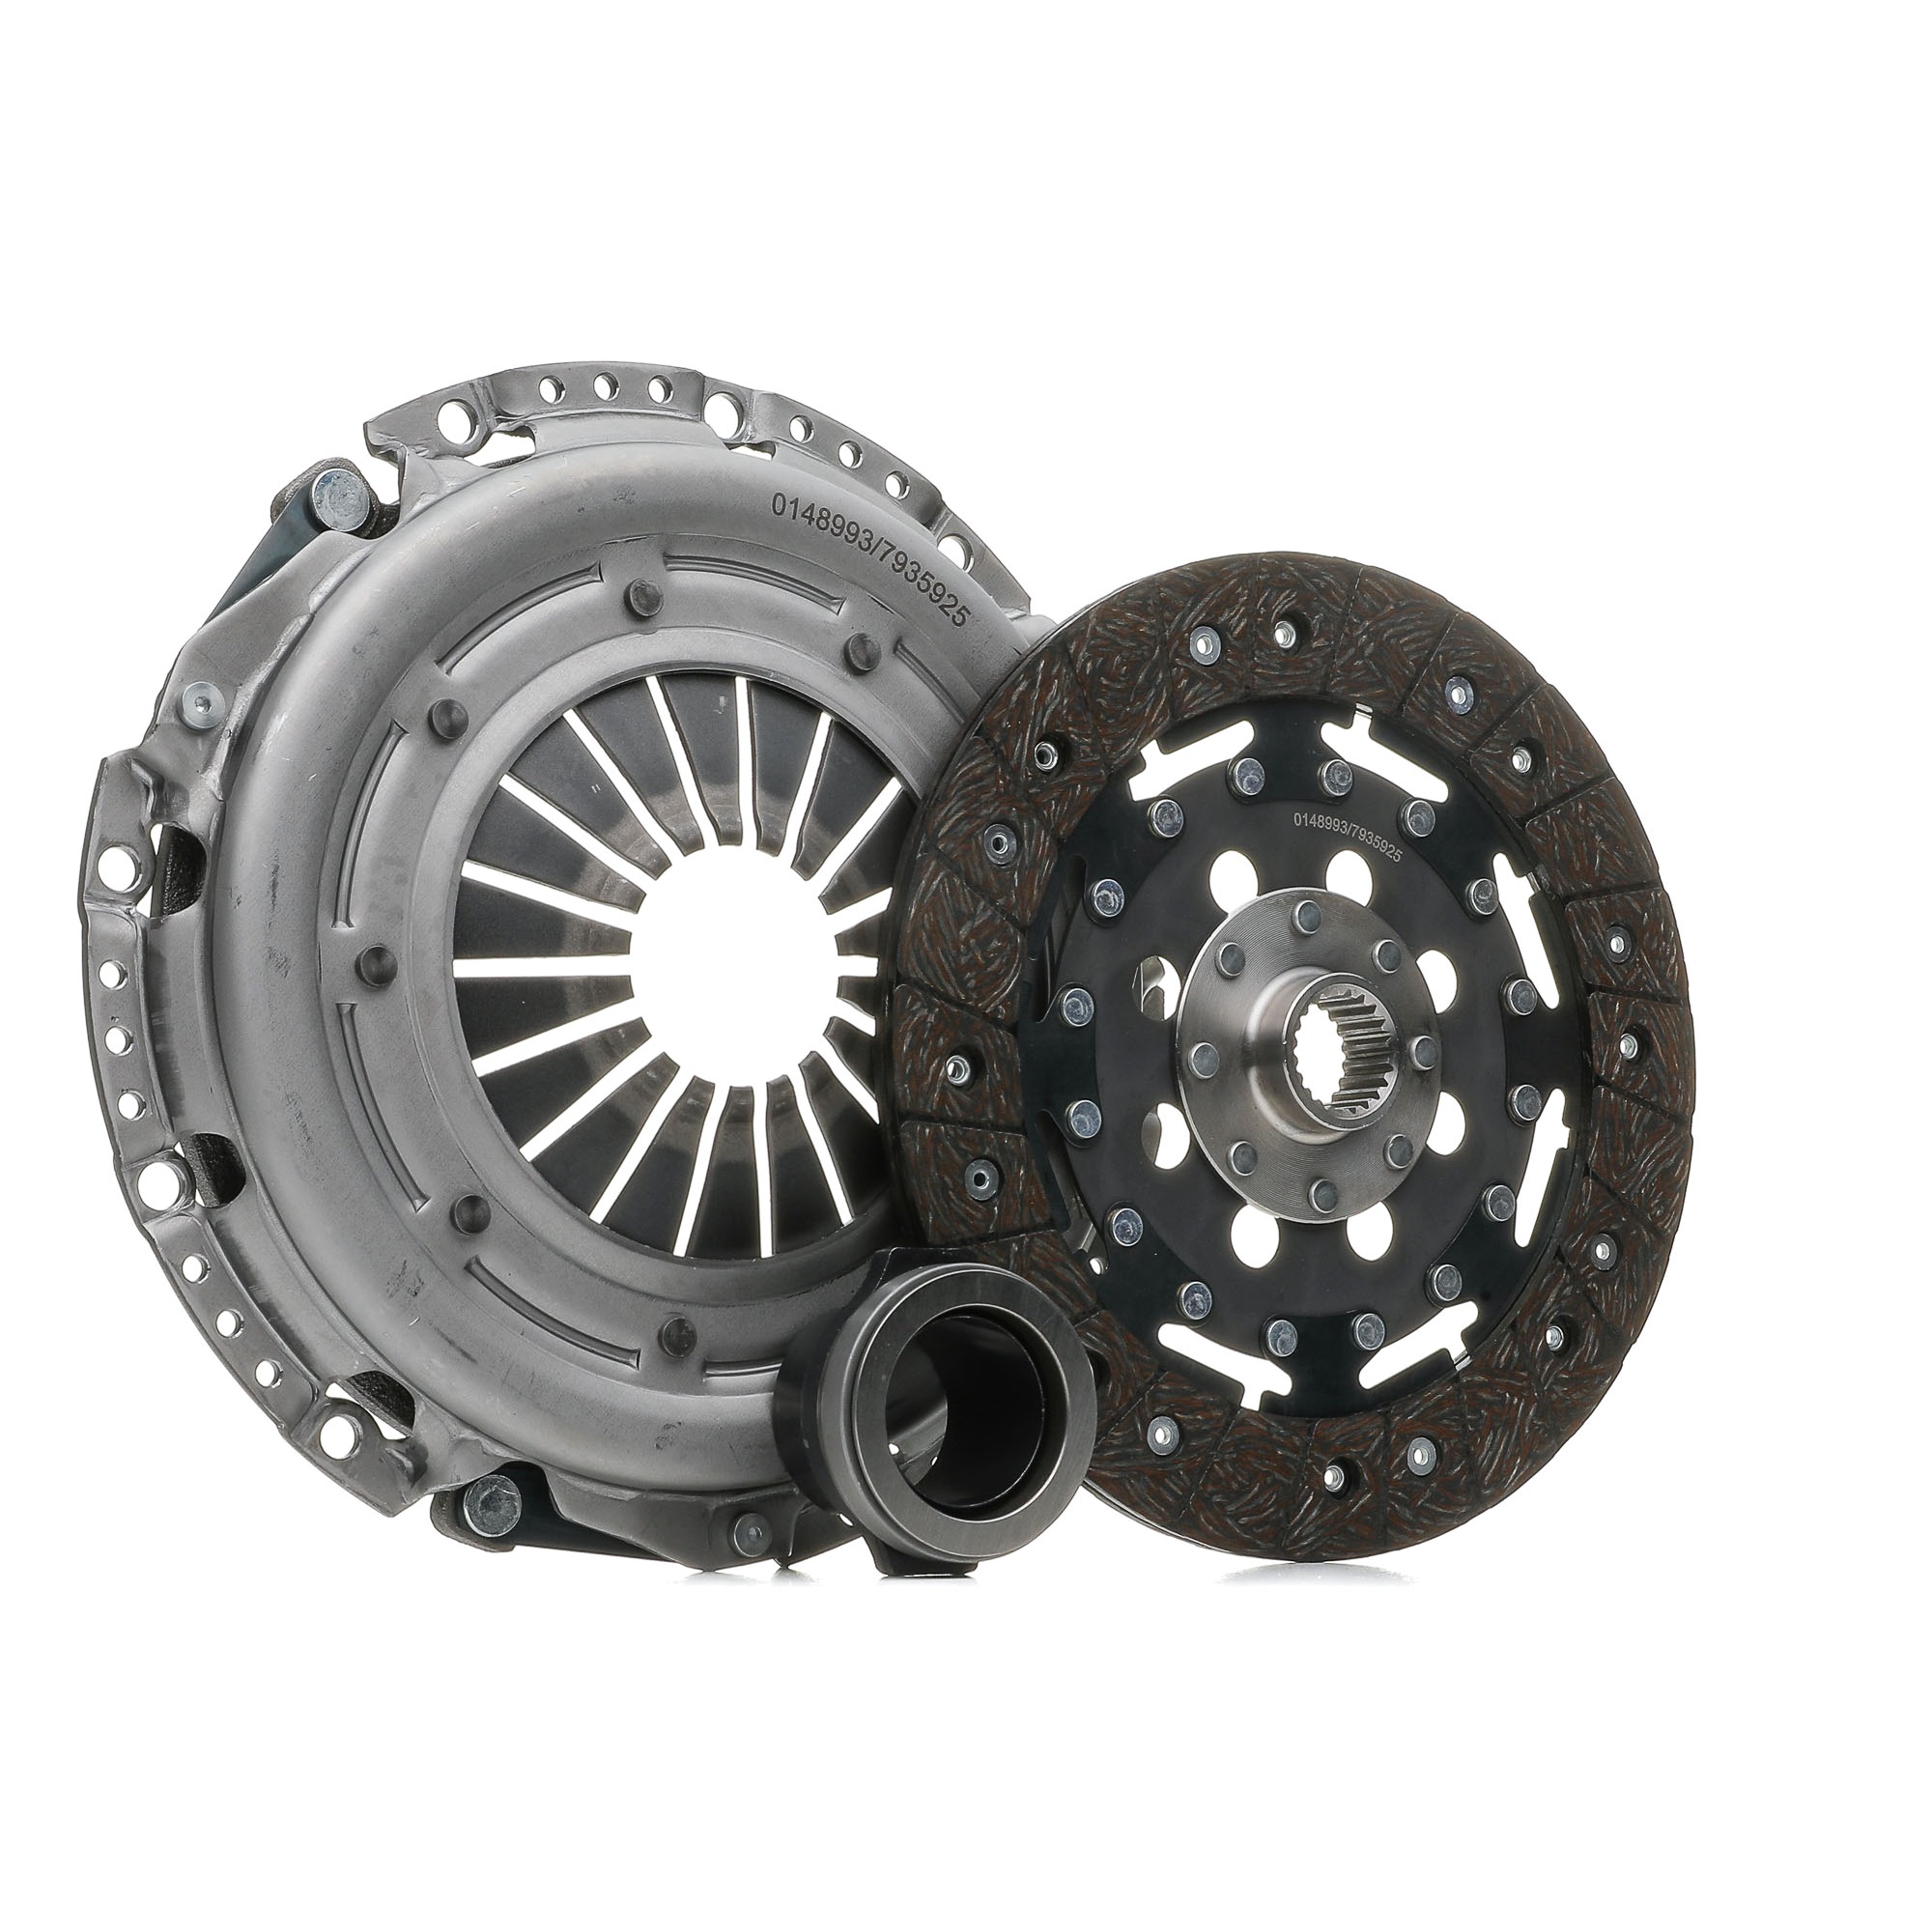 STARK SKCK-0100027 Clutch kit three-piece, with clutch pressure plate, with clutch release bearing, with clutch disc, 240mm